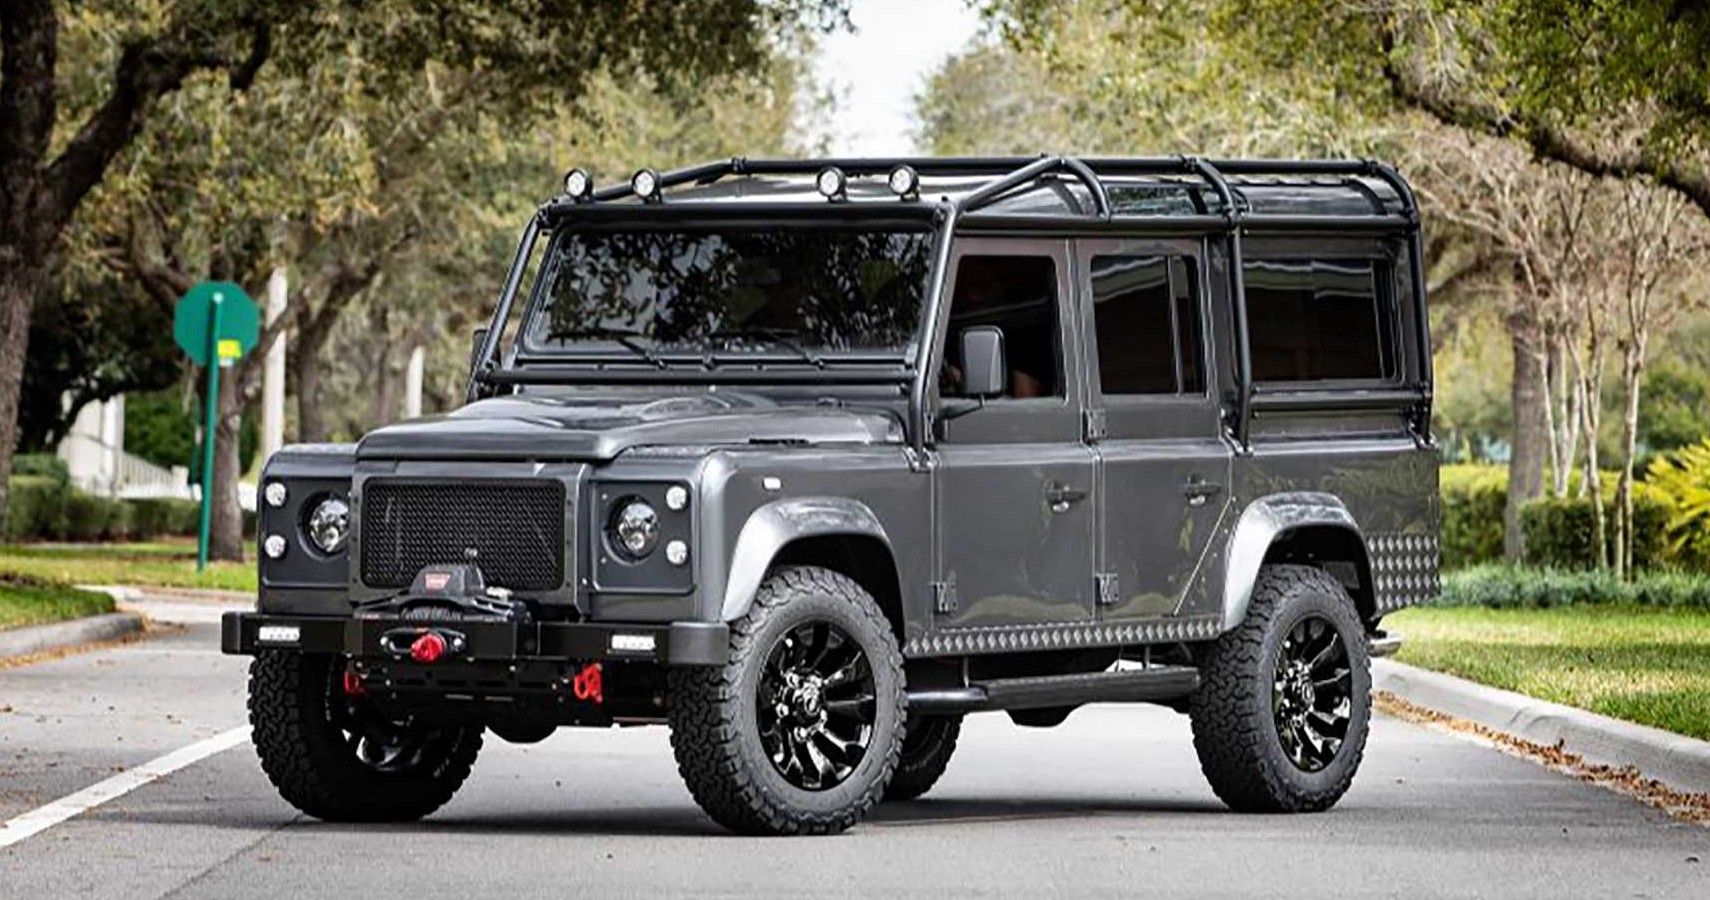 ECD has teamed up with ECC to build a Tesla powered Land Rover